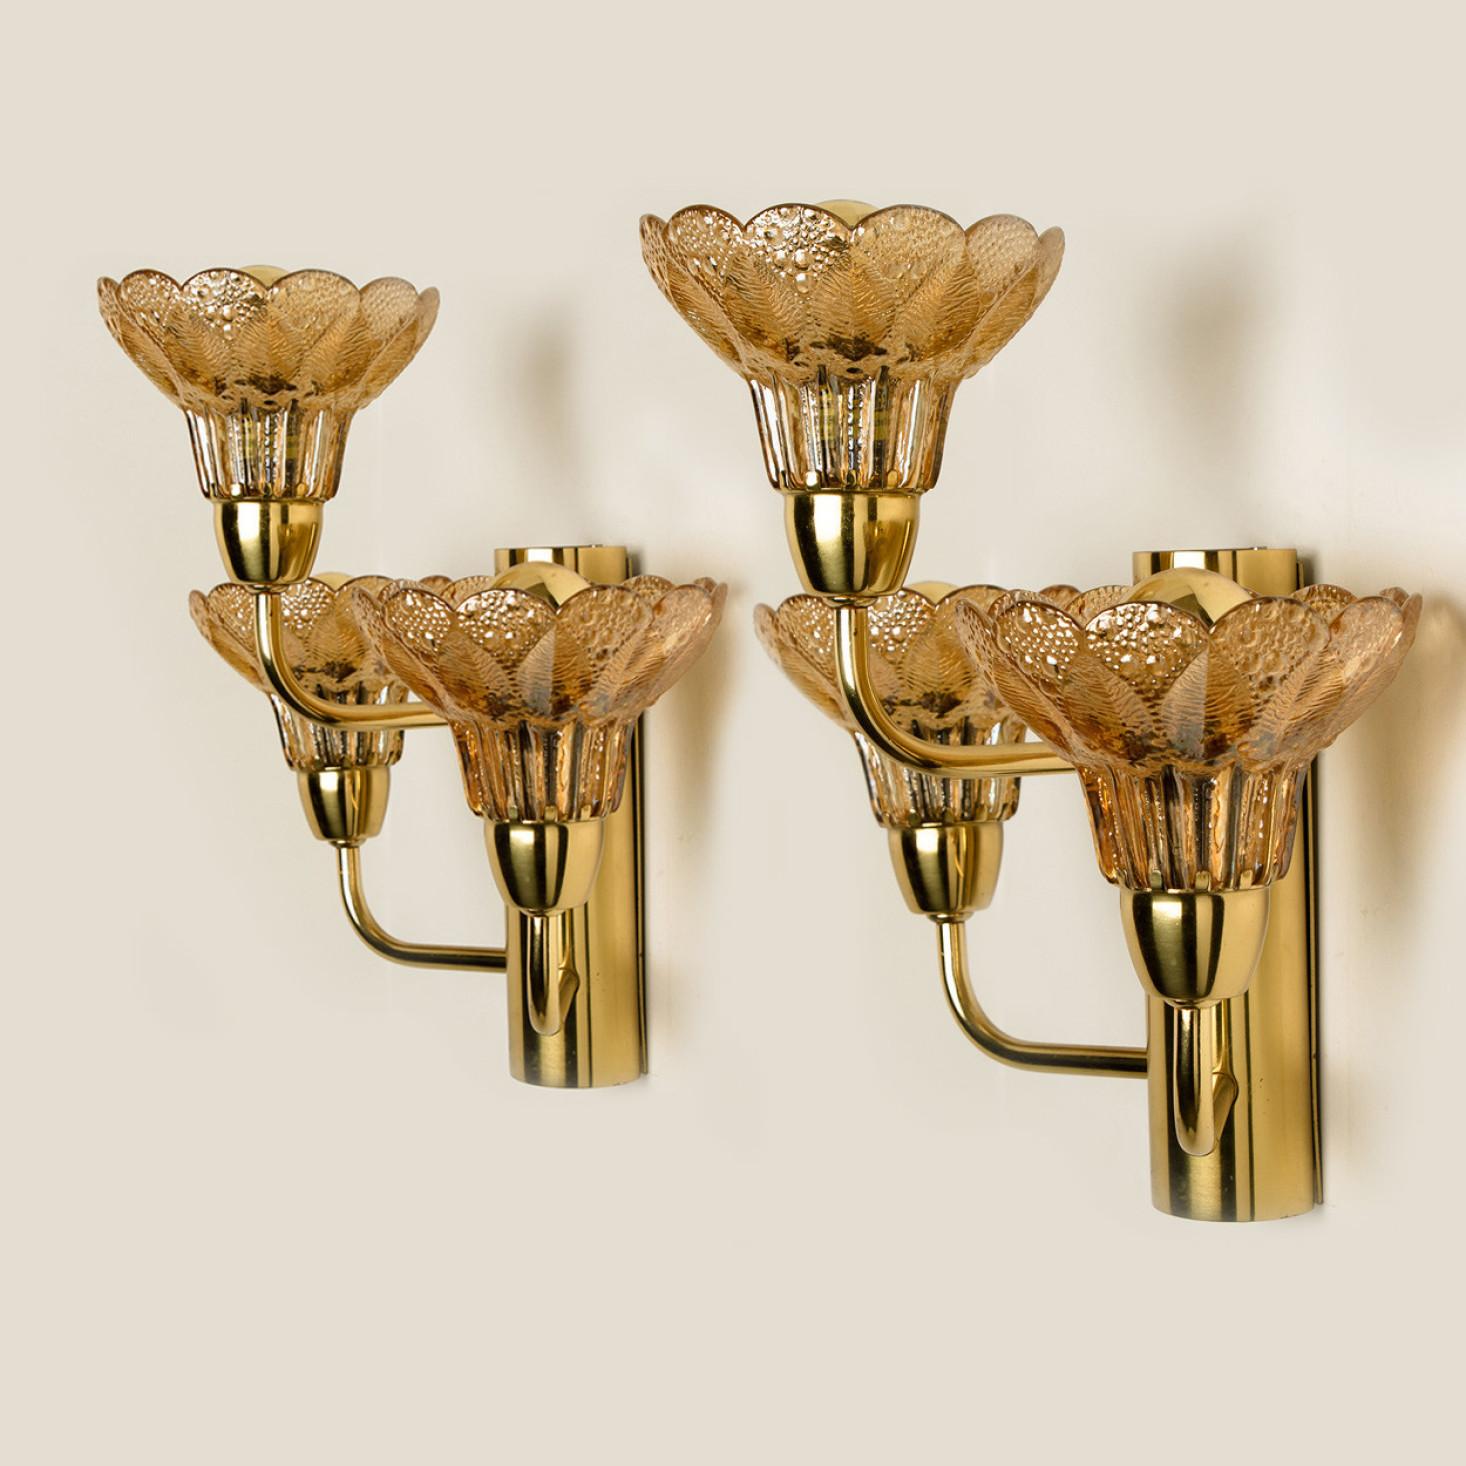 Several Flower Glass and Brass Wall Sconces, Germany, 1960s For Sale 11